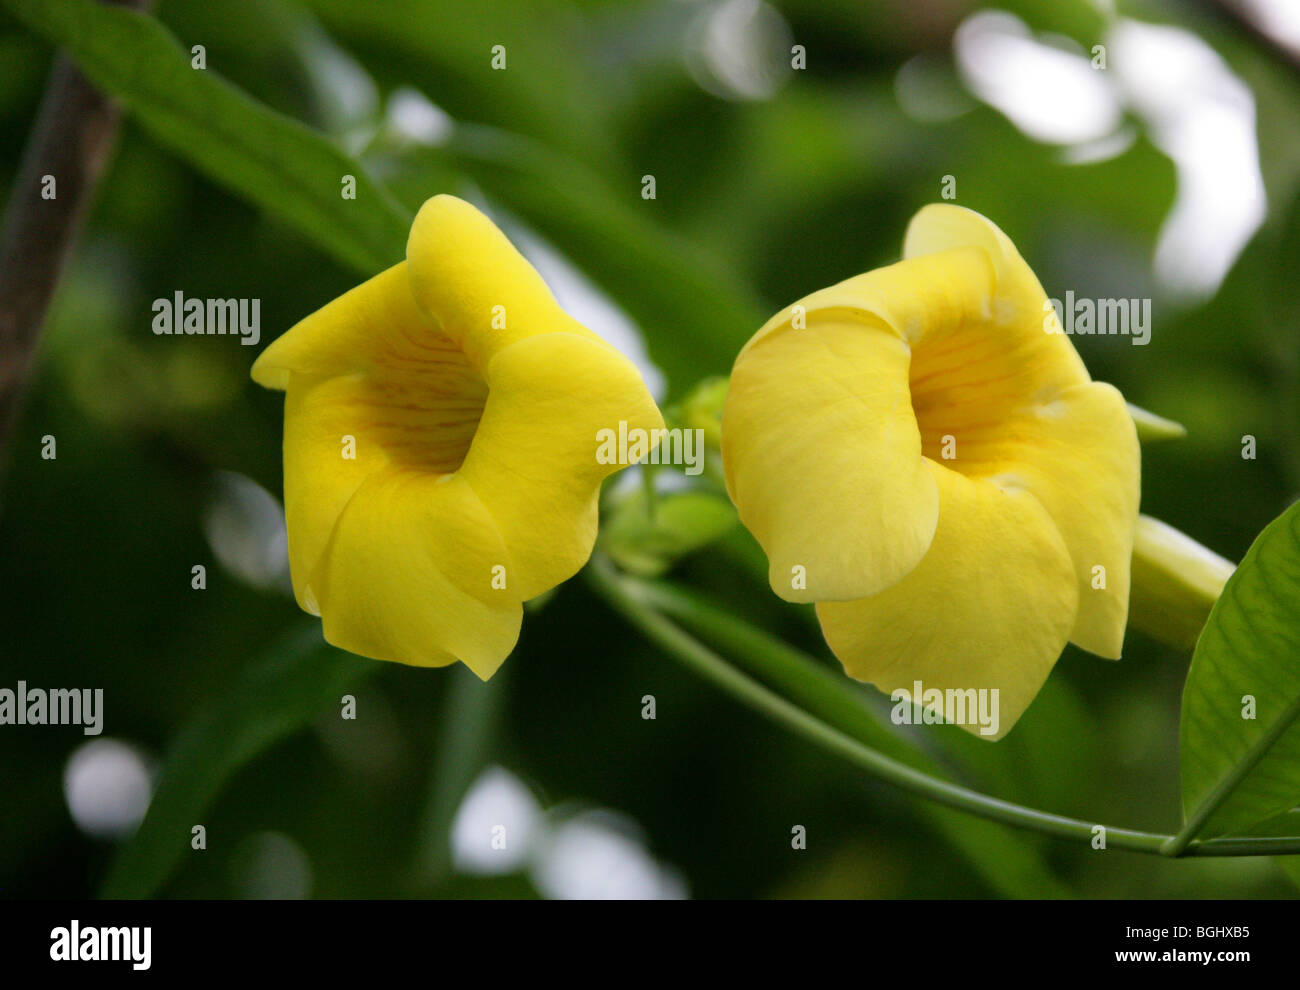 Golden Trumpet, Allamanda cathartica, Apocynaceae, Brazil, South America. A prolific climbing plant from tropical South America. Stock Photo